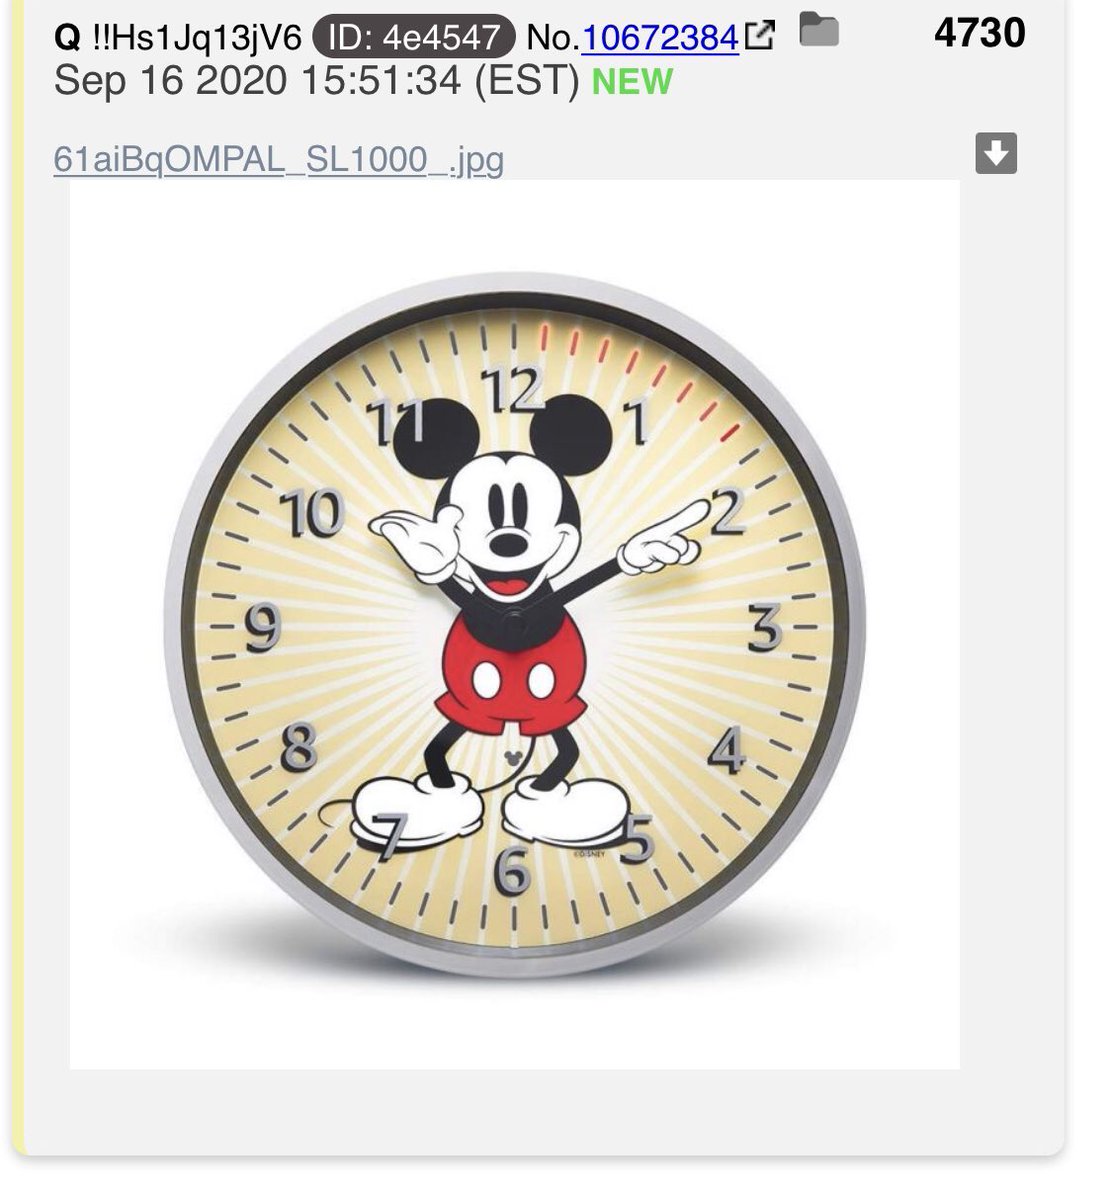 @janiszewski_q It’s not a watch. 
It’s a CLOCK. 
Sold by amazon. 
Adding a bit of autistic info. for ya. 
Happy digging! 😊